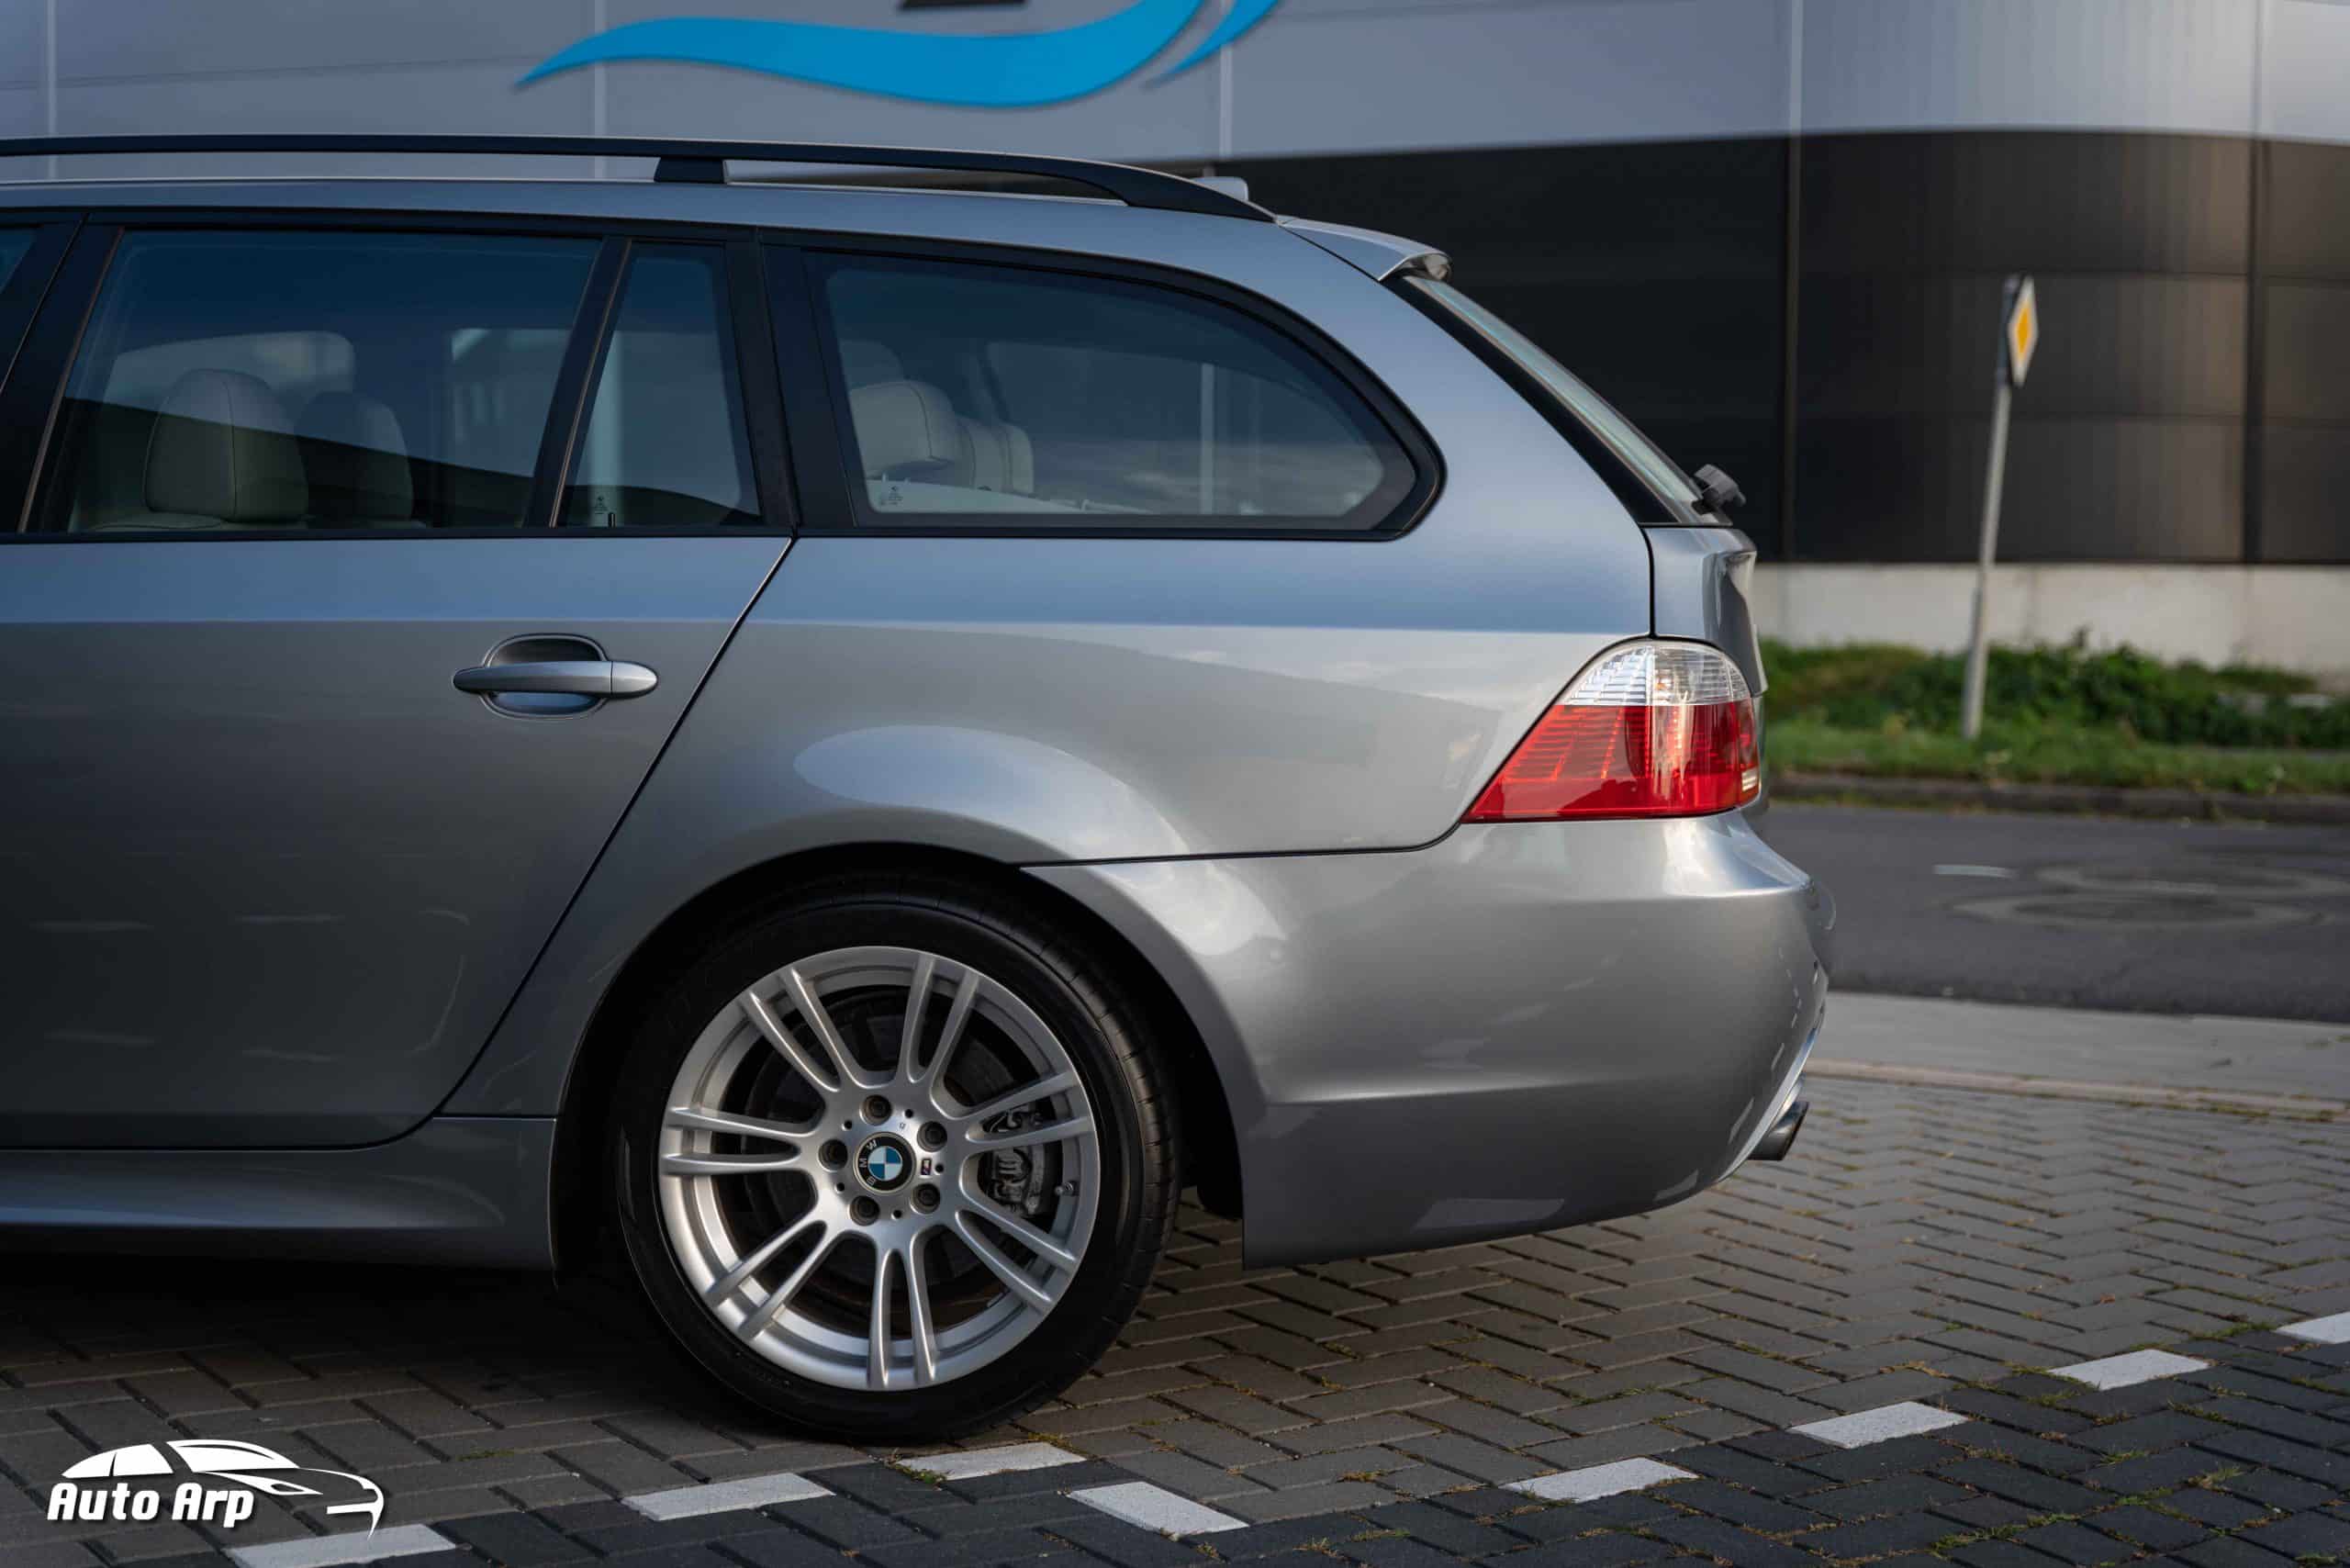 BMW SERIE 3 TOURING bmw-bmw-e61-525i-foliert-tuning-tausch occasion - Le  Parking